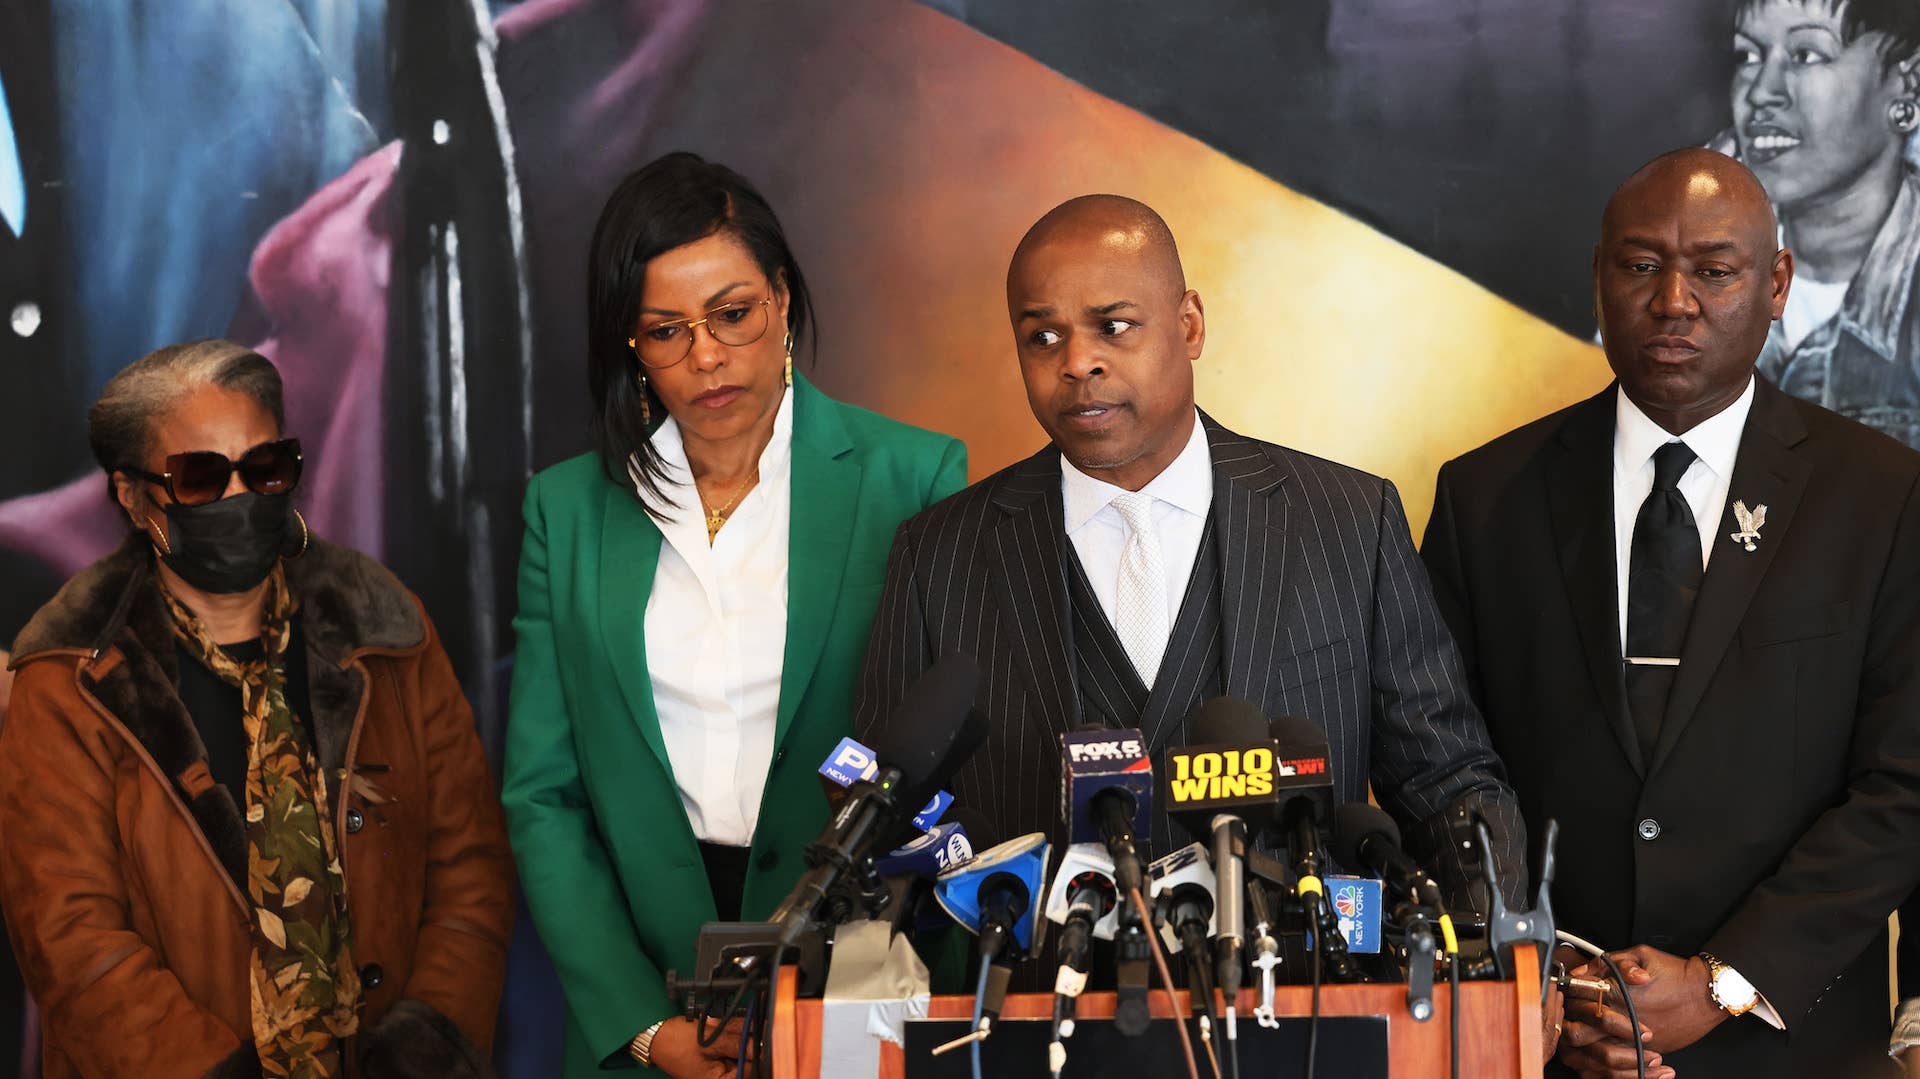 This is a photo of Malcolm X's family on the right and Civil Rights Attorney Ben Crump on the left